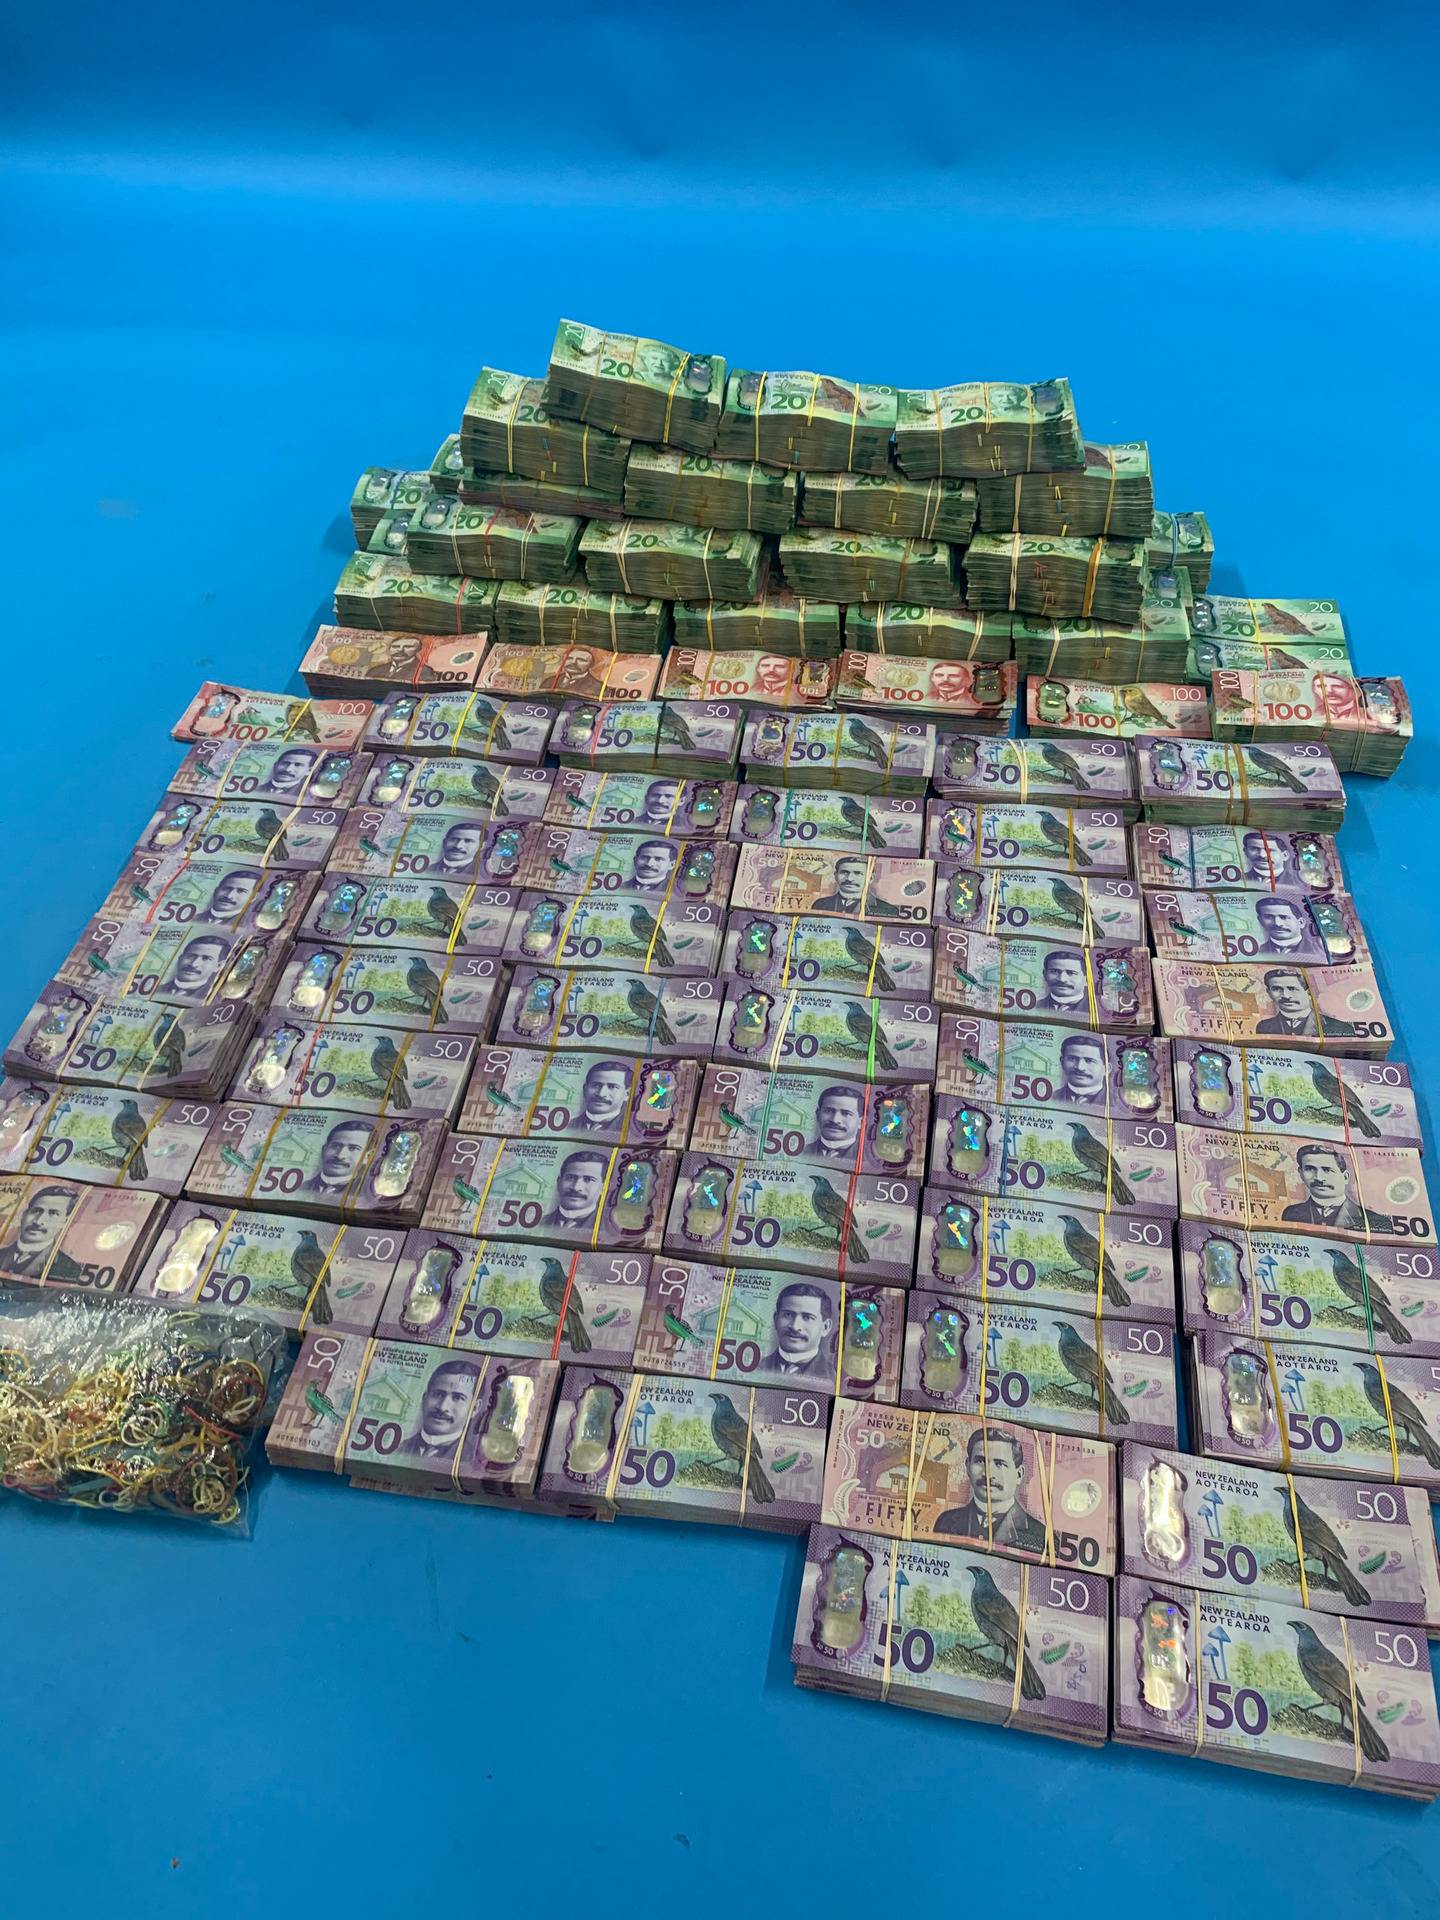 More than $1m cash was seized in New Zealand following the global coordinated sting on organised crime. Photo / NZ Police